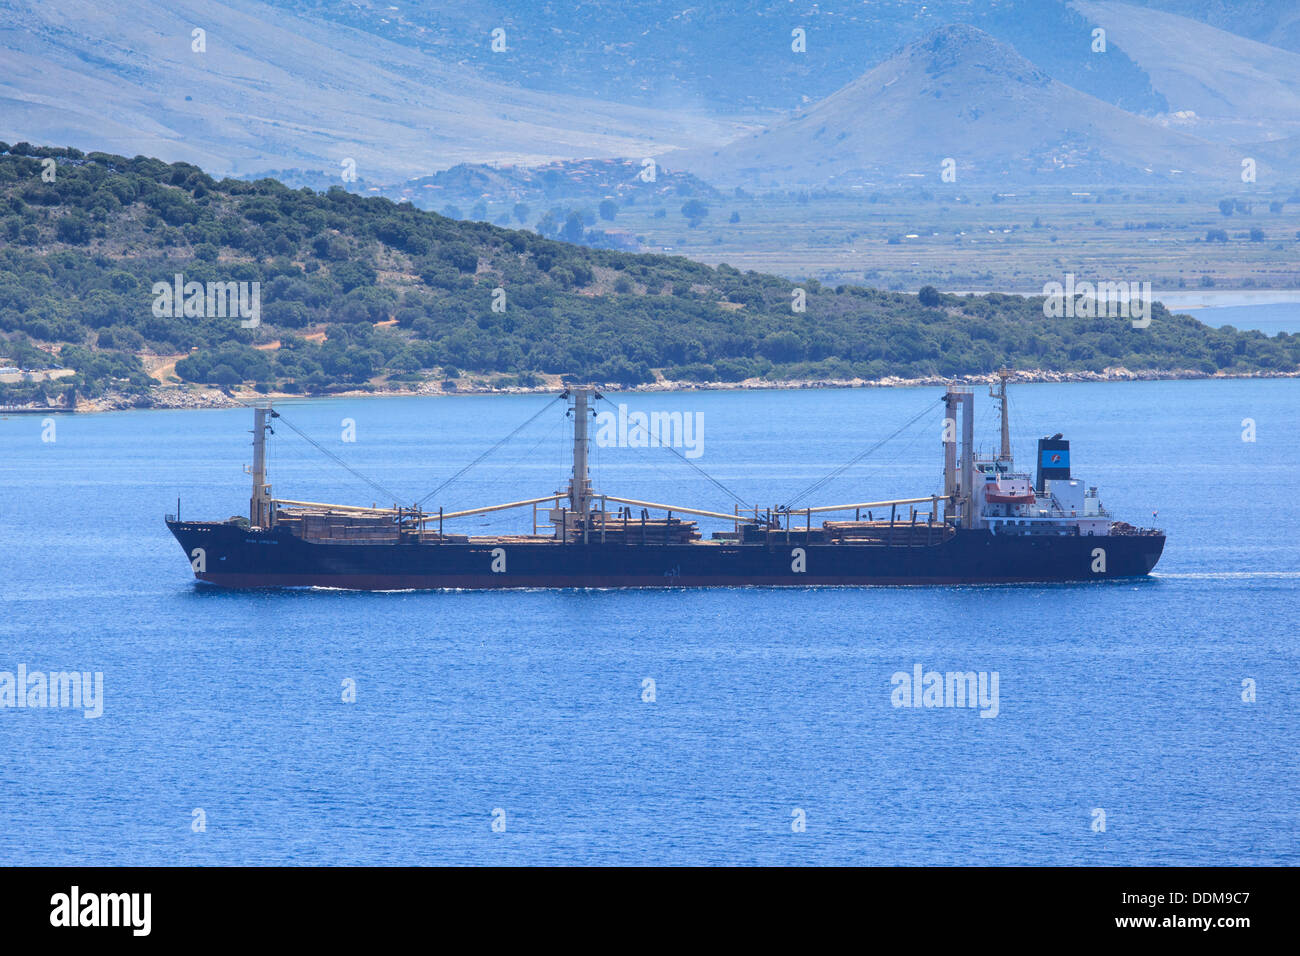 The cargo ship Reina Christina carrying timber in the straits between Corfu and Albania Stock Photo